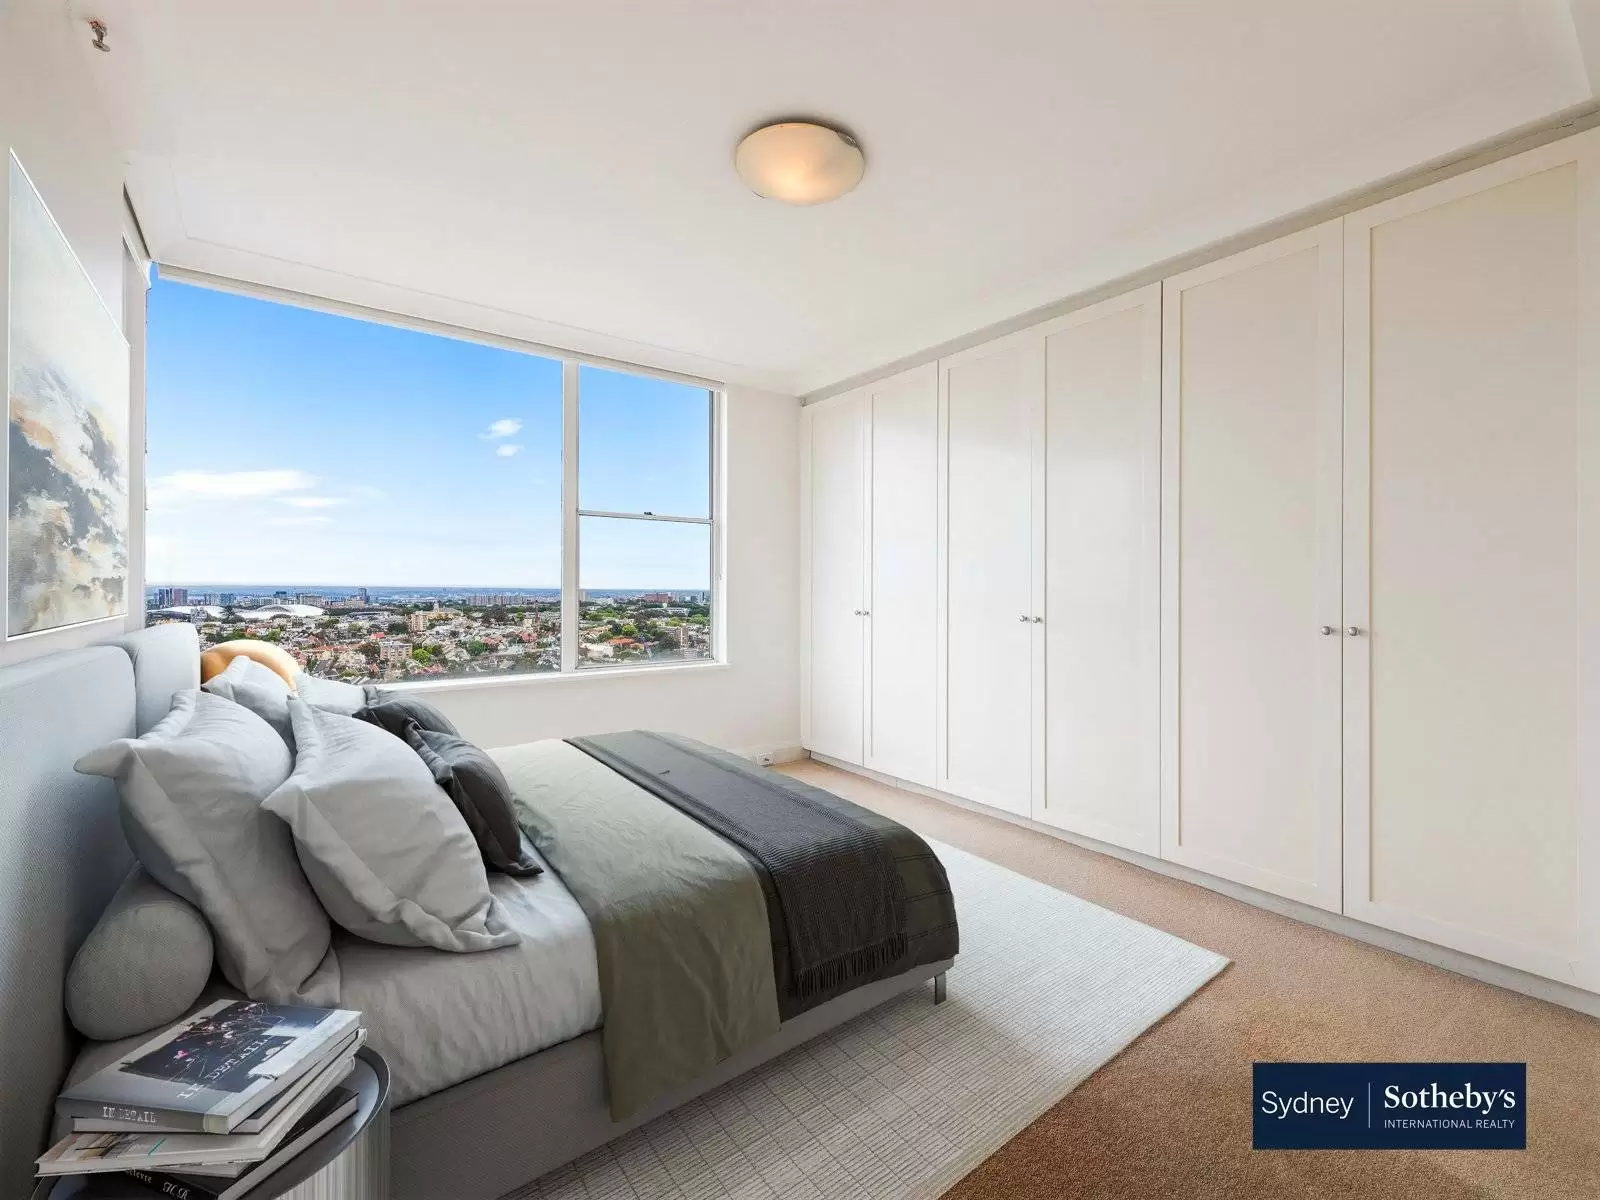 26a/3 Darling Point Road, Darling Point Leased by Sydney Sotheby's International Realty - image 6